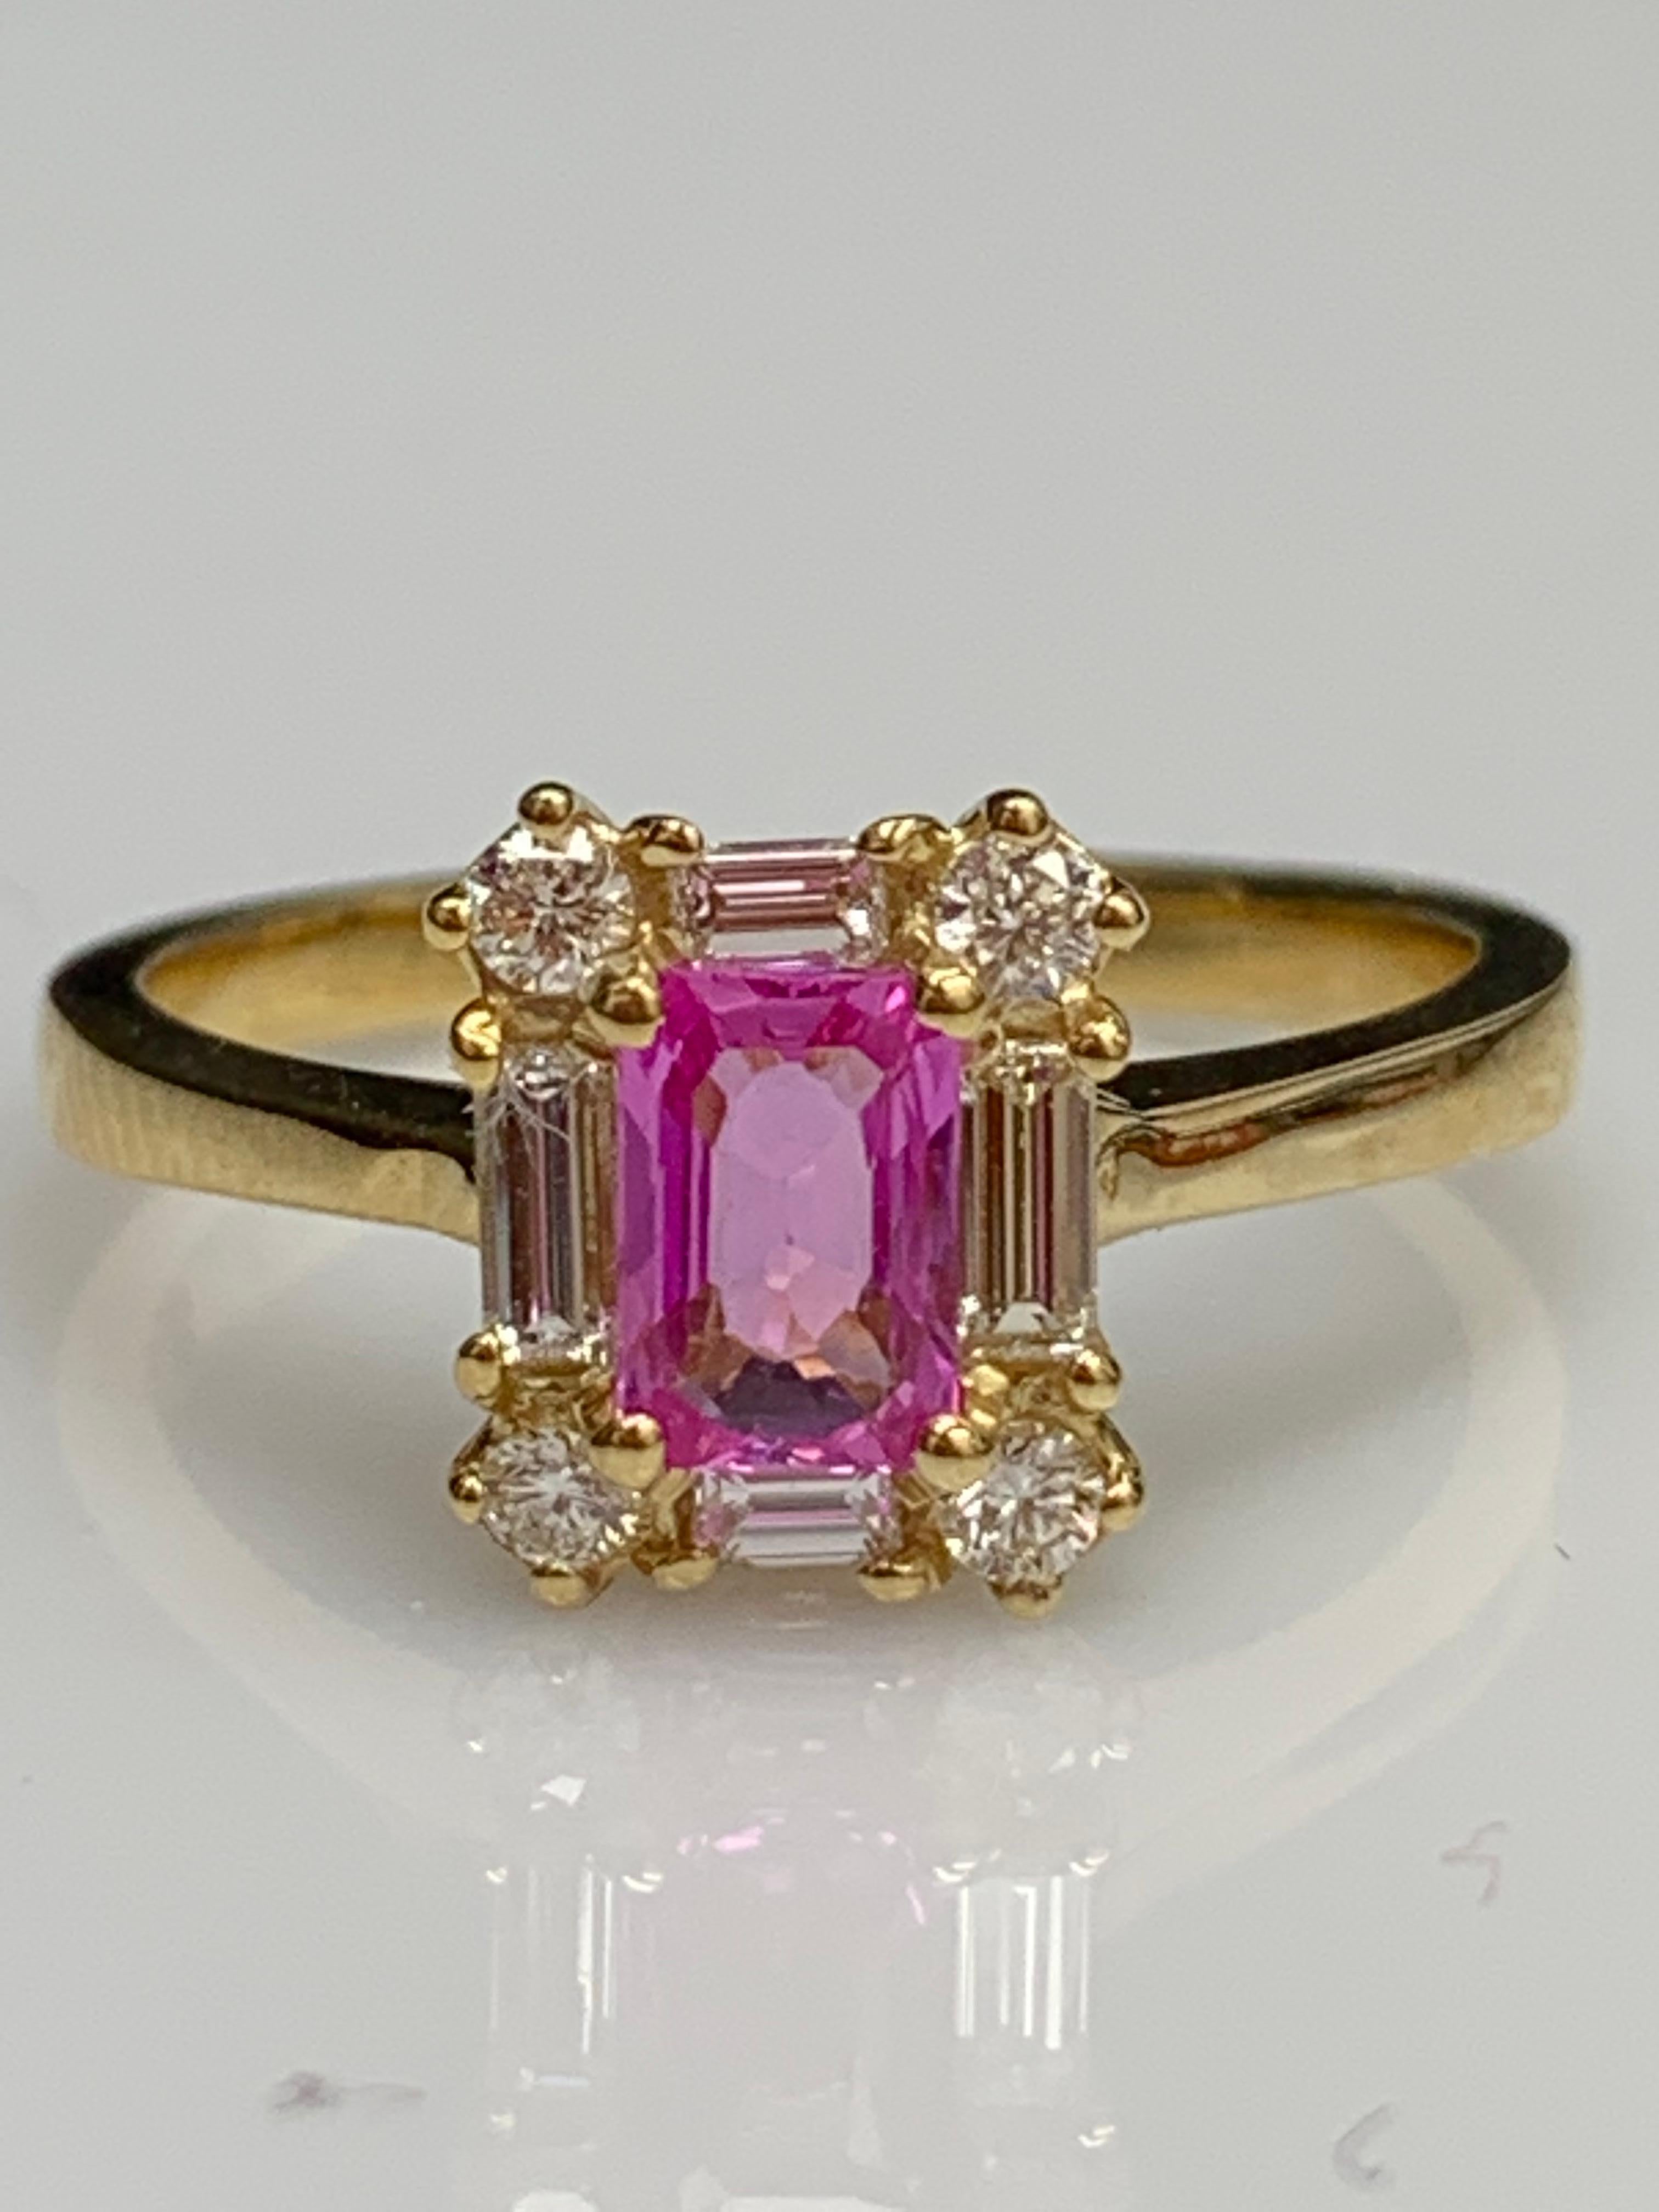 0.55 Carat Emerald Cut Pink Sapphire and Diamond Ring 14K Yellow Gold For Sale 5